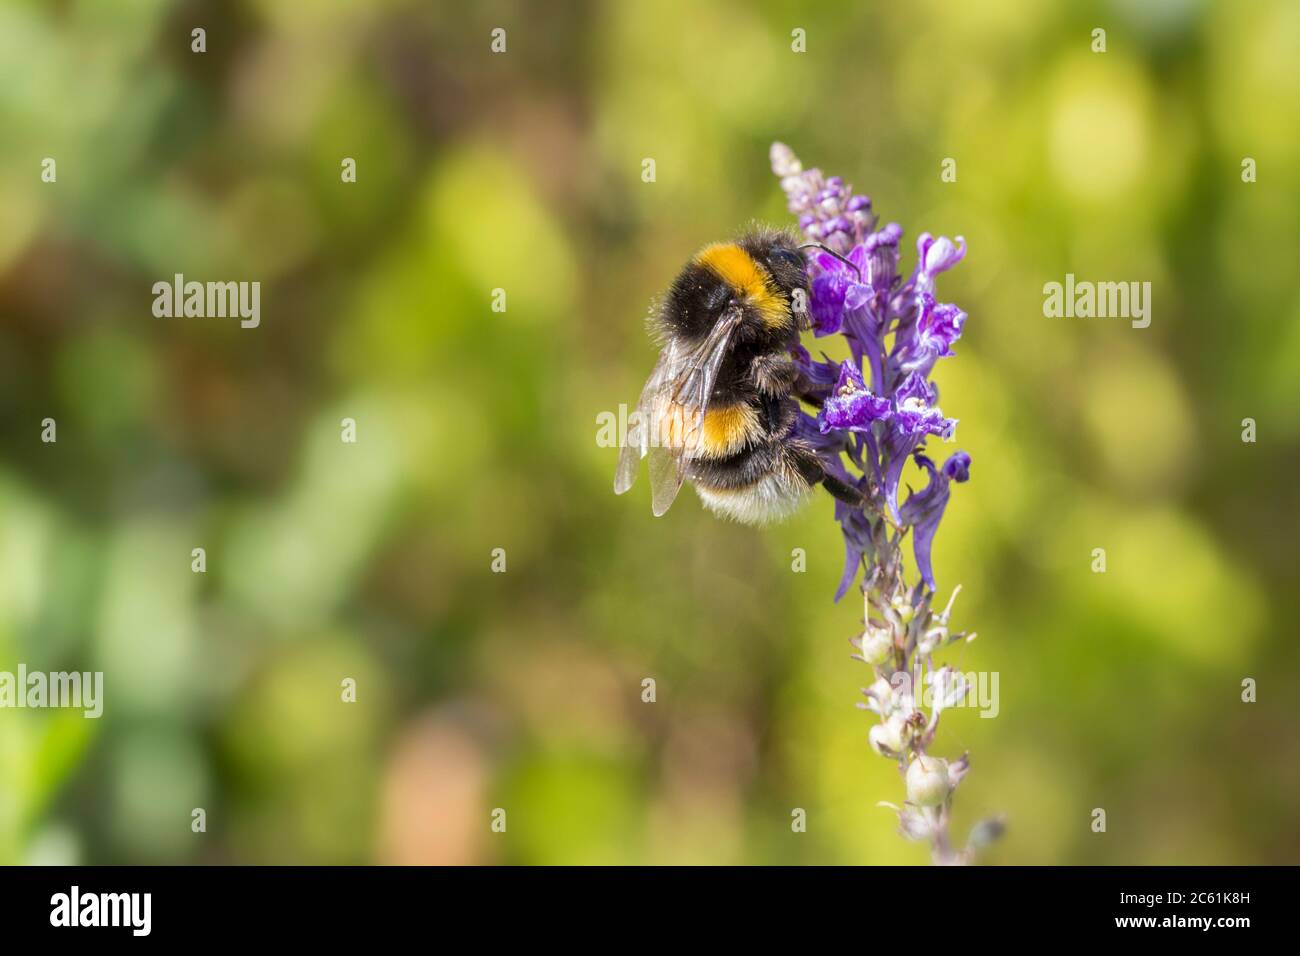 Buff tailed bumble bee on purple flower (Bombus terrestris) buff tip of abdomen yellow band on abdomen and front of thorax otherwise black. Stock Photo